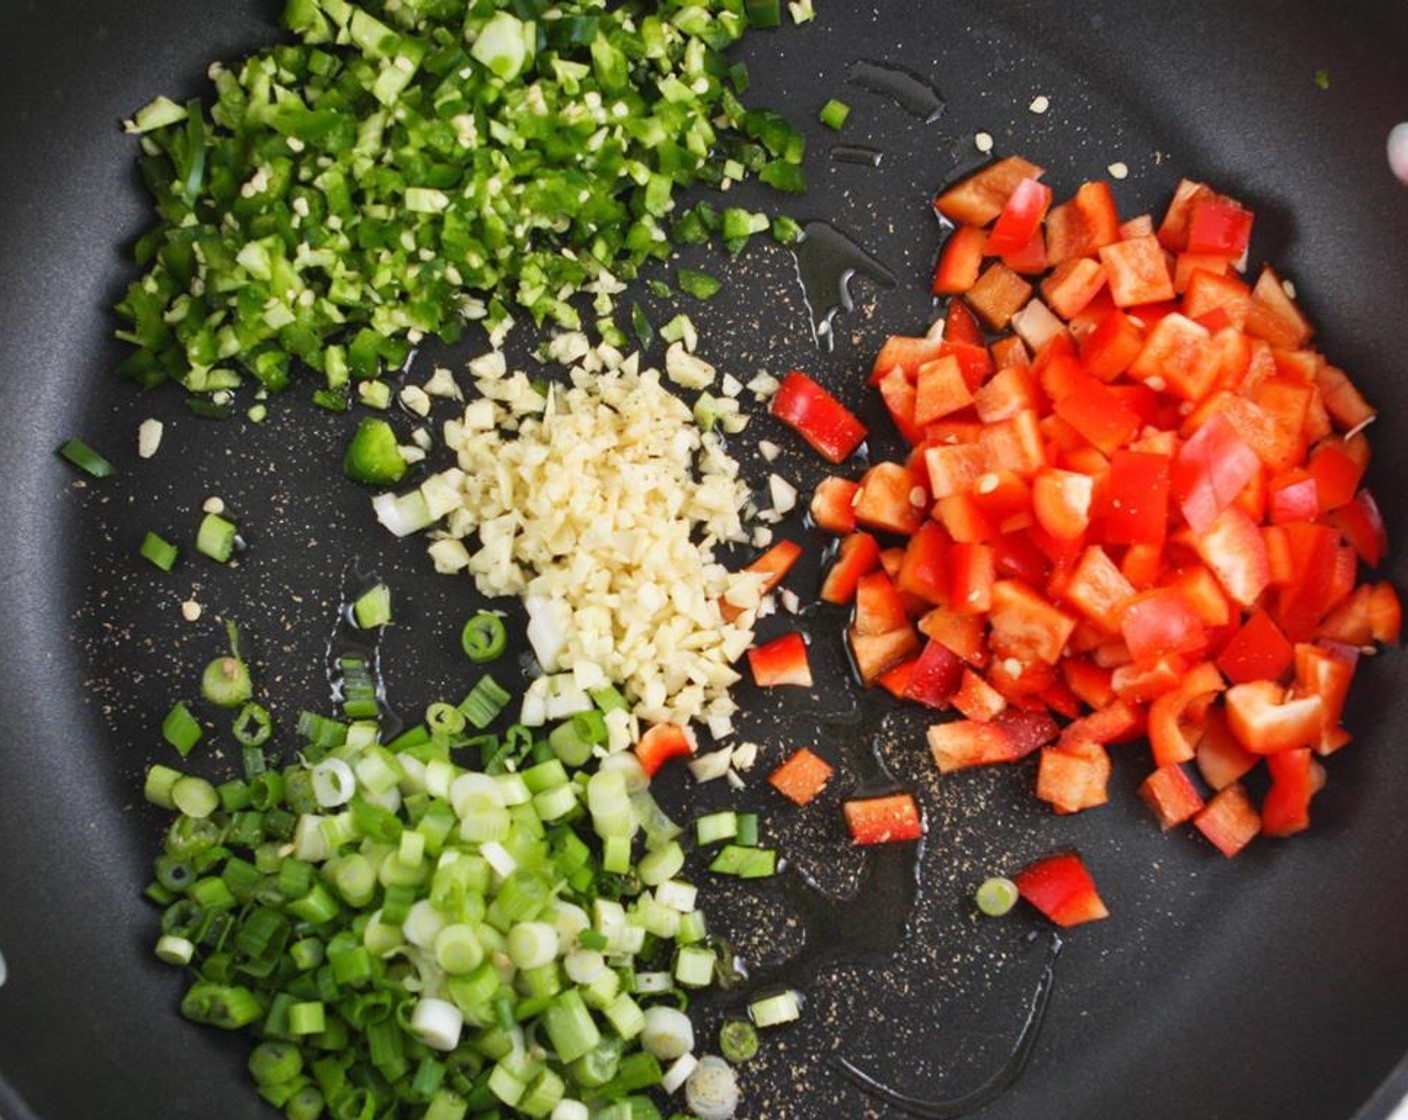 step 1 Heat Extra-Virgin Olive Oil (3 Tbsp) in an extra-large skillet over medium heat. Add Garlic (4 cloves), Red Bell Pepper (1), Scallion (1 bunch), Jalapeño Peppers (2), Salt (to taste), and Ground Black Pepper (to taste). Cook 3-4 minutes.